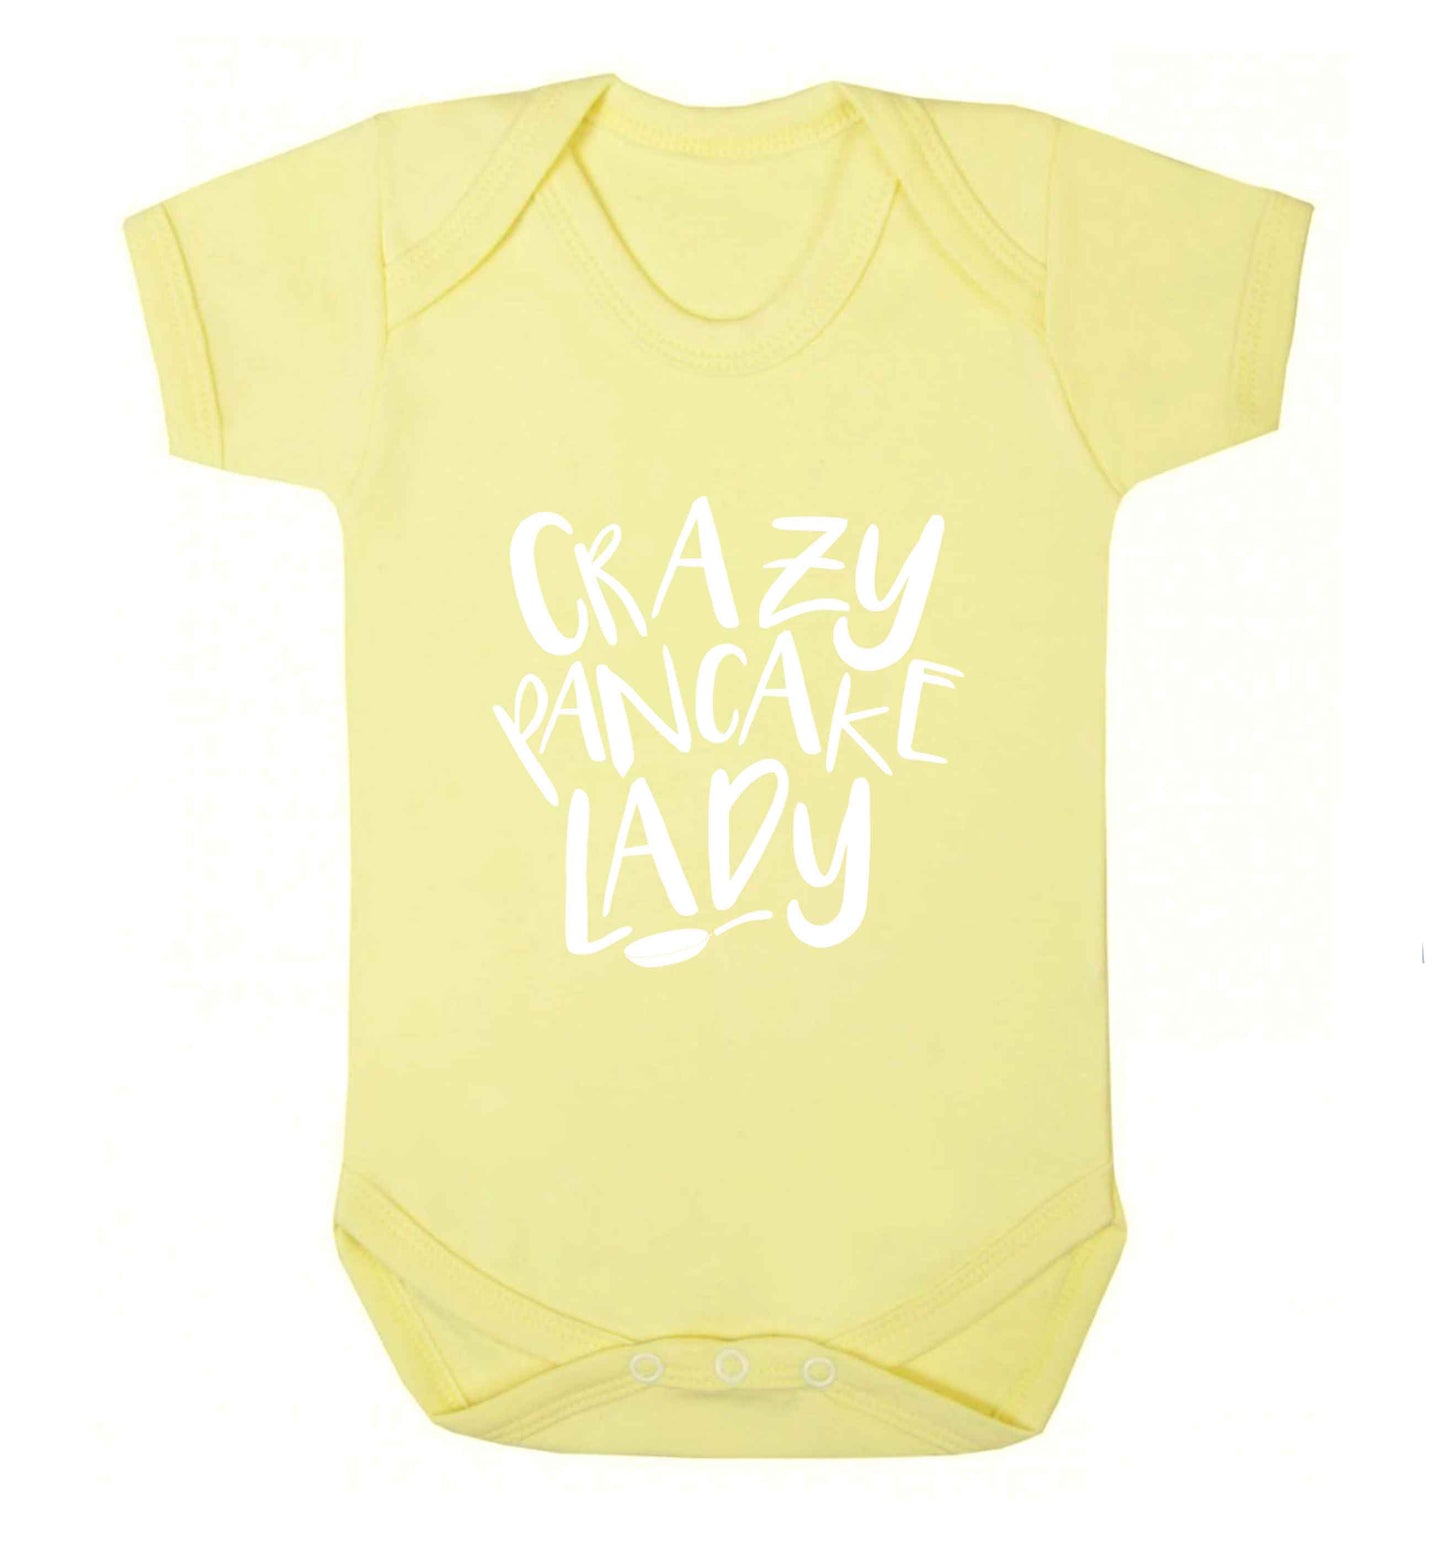 Crazy pancake lady baby vest pale yellow 18-24 months